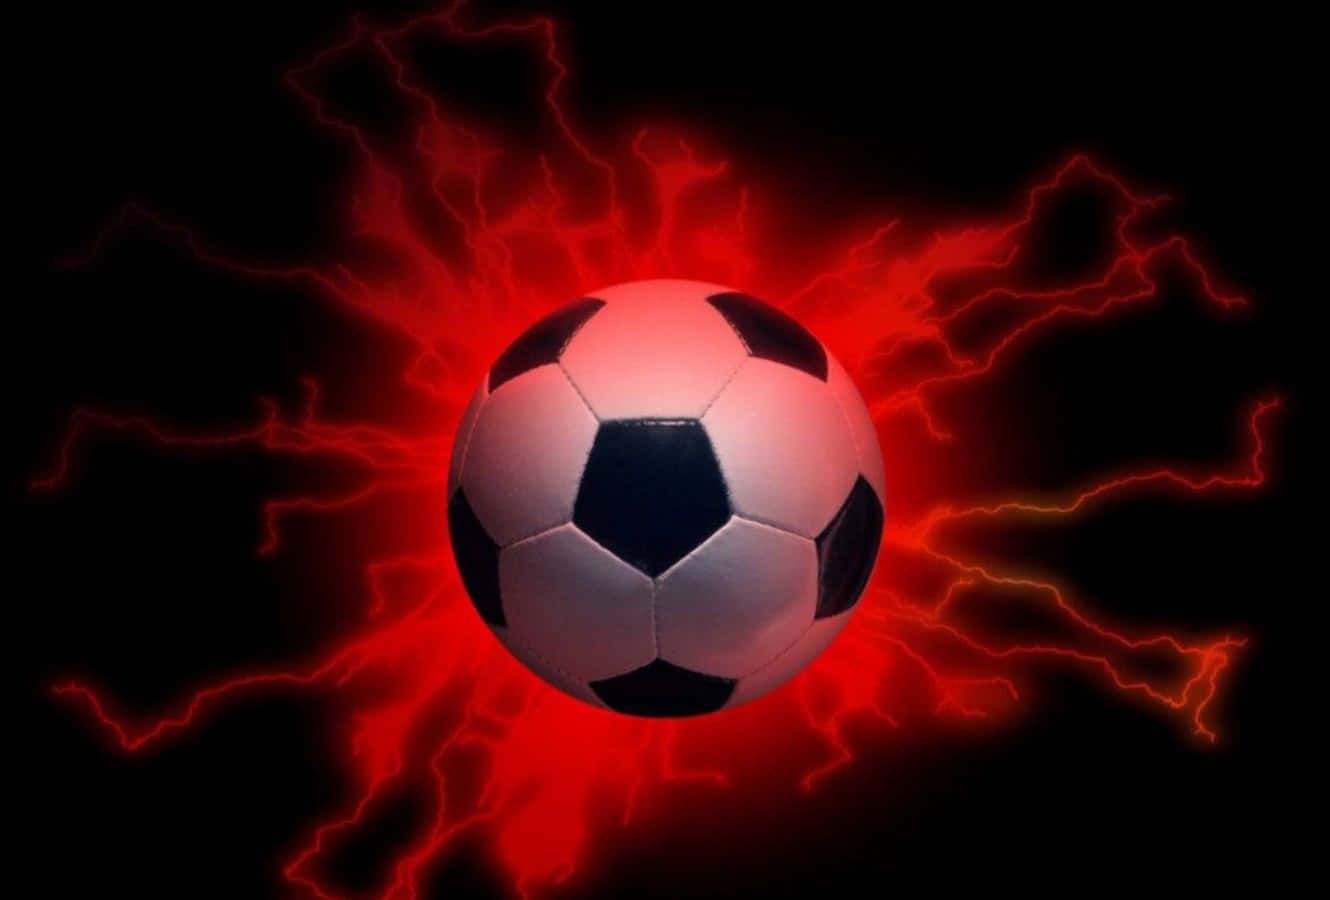 A soccer ball with red lightning behind it - Soccer